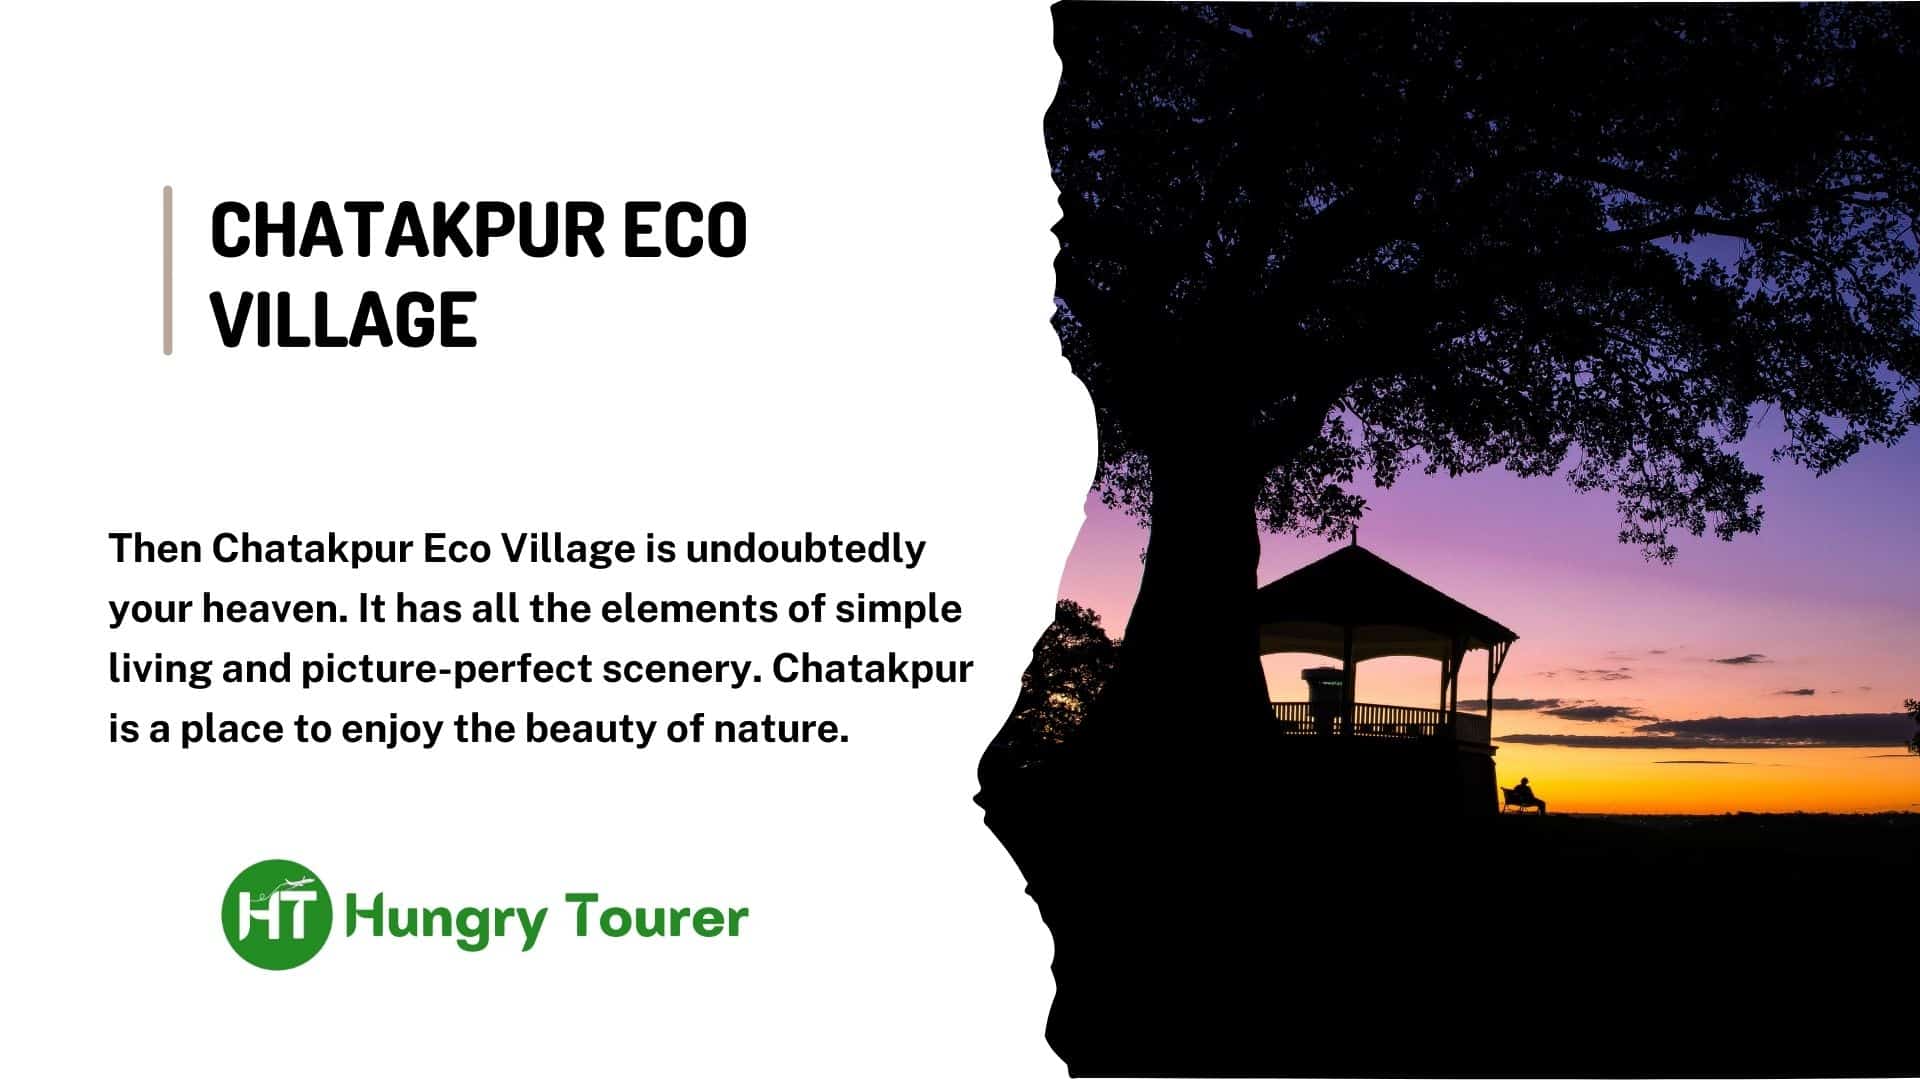 Chatakpur Eco Village - hungry tourer